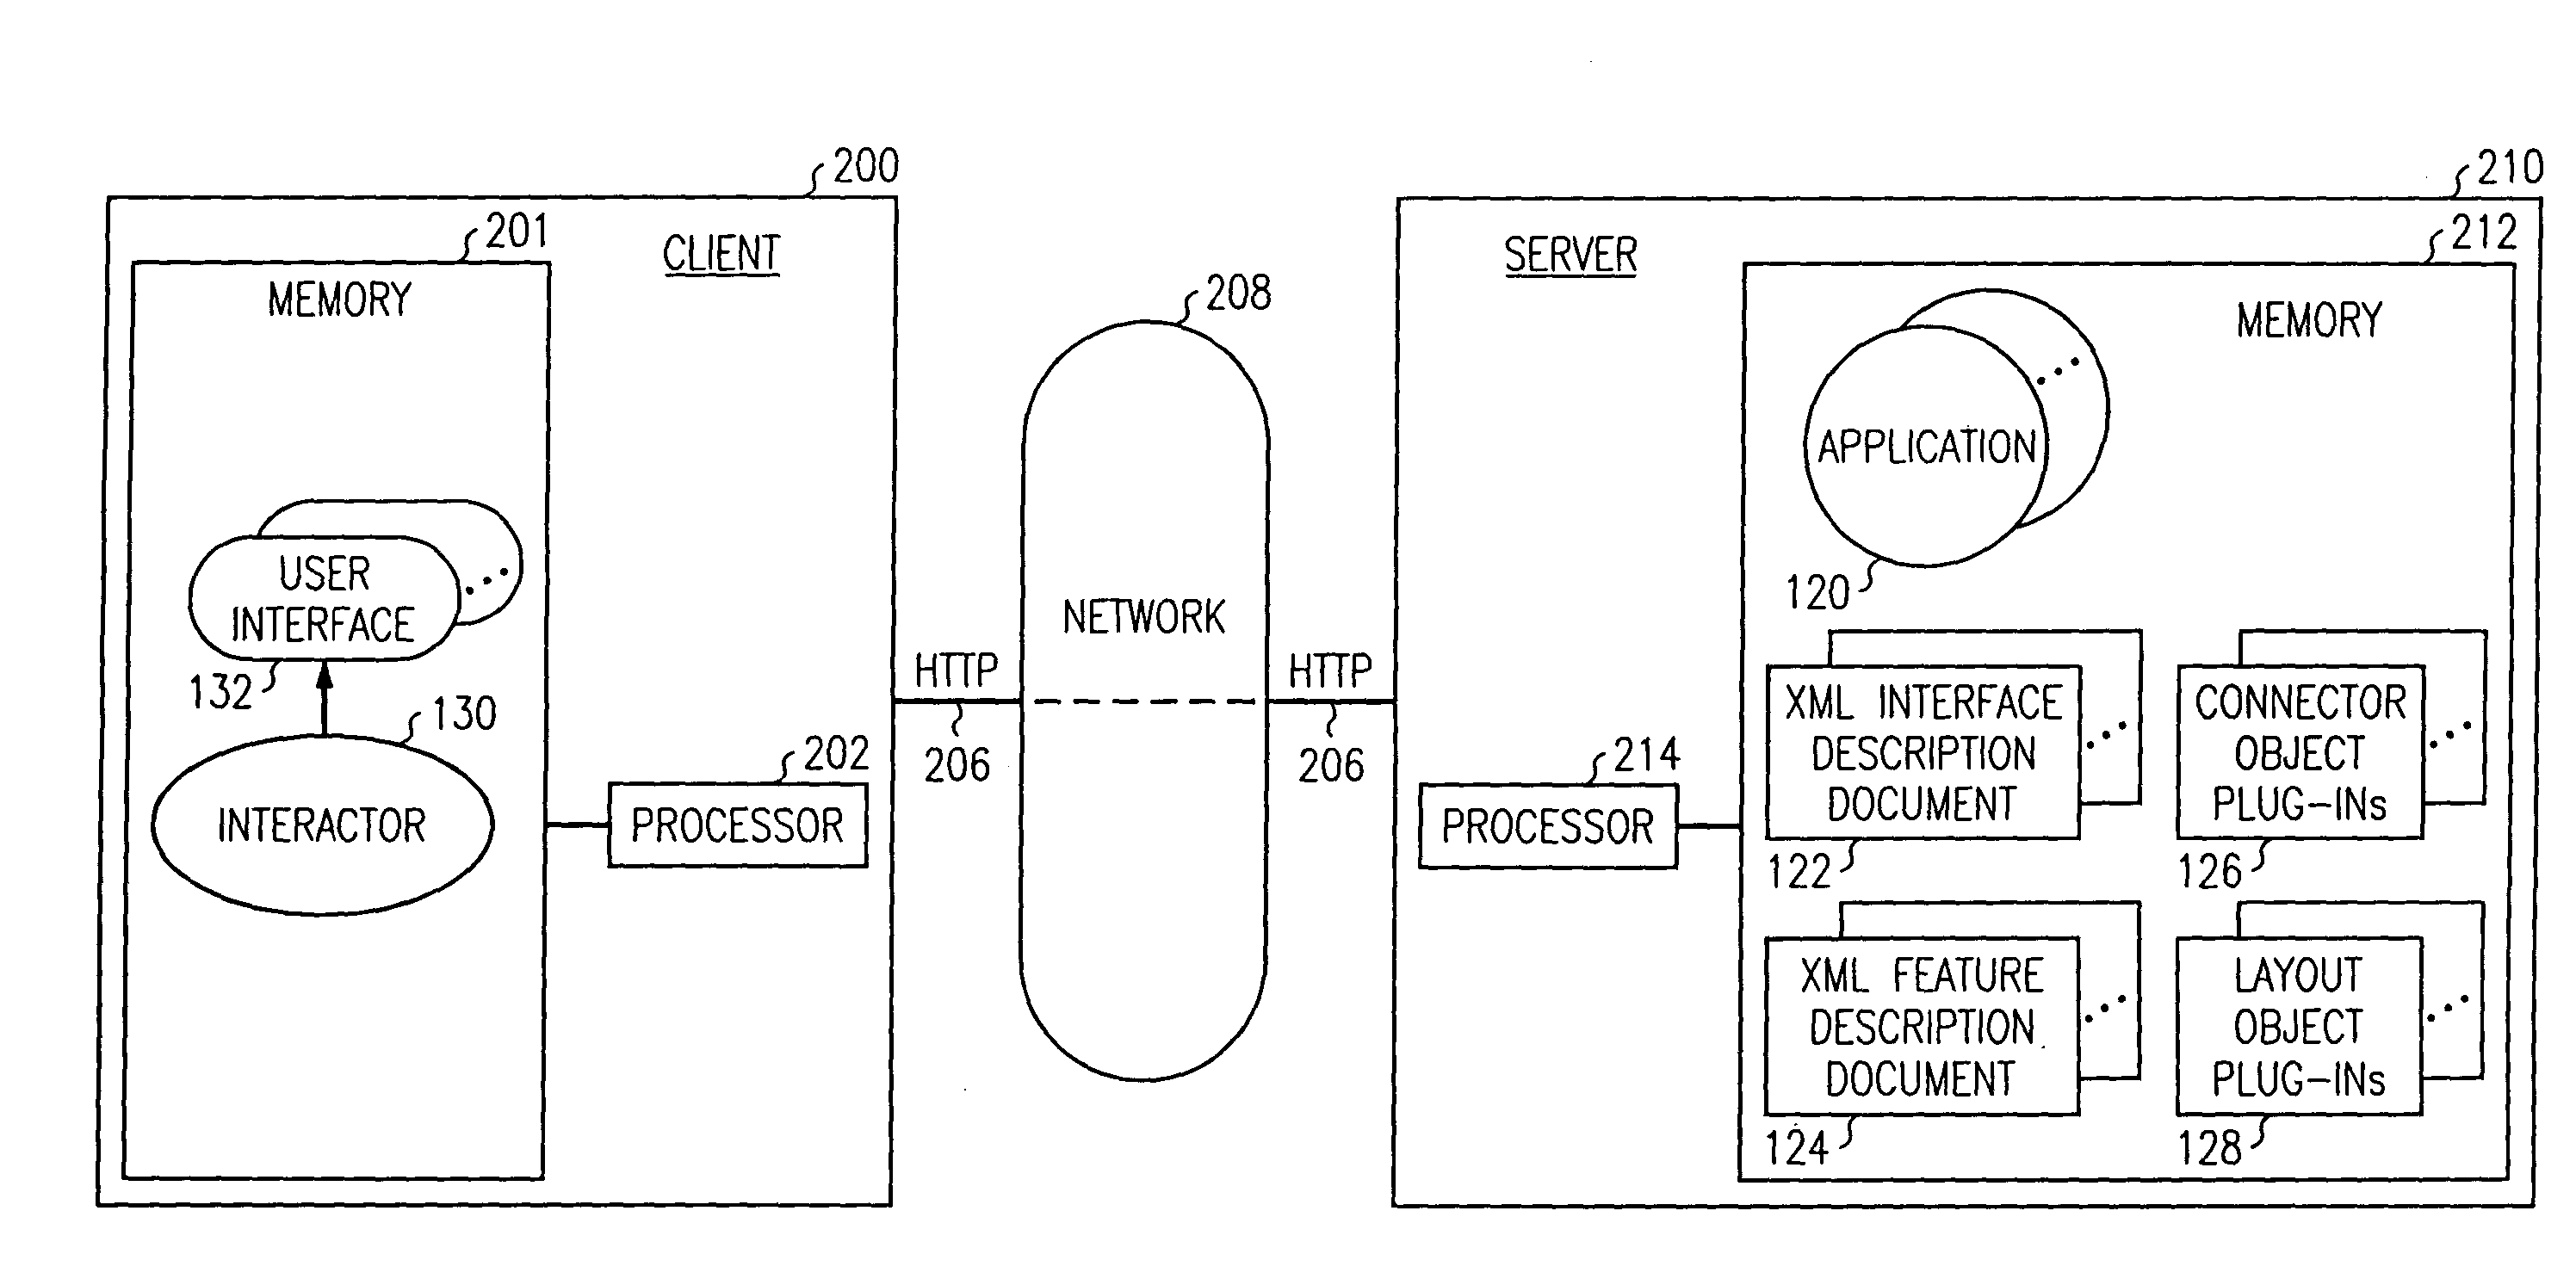 Mark-up language implementation of graphical or non-graphical user interfaces